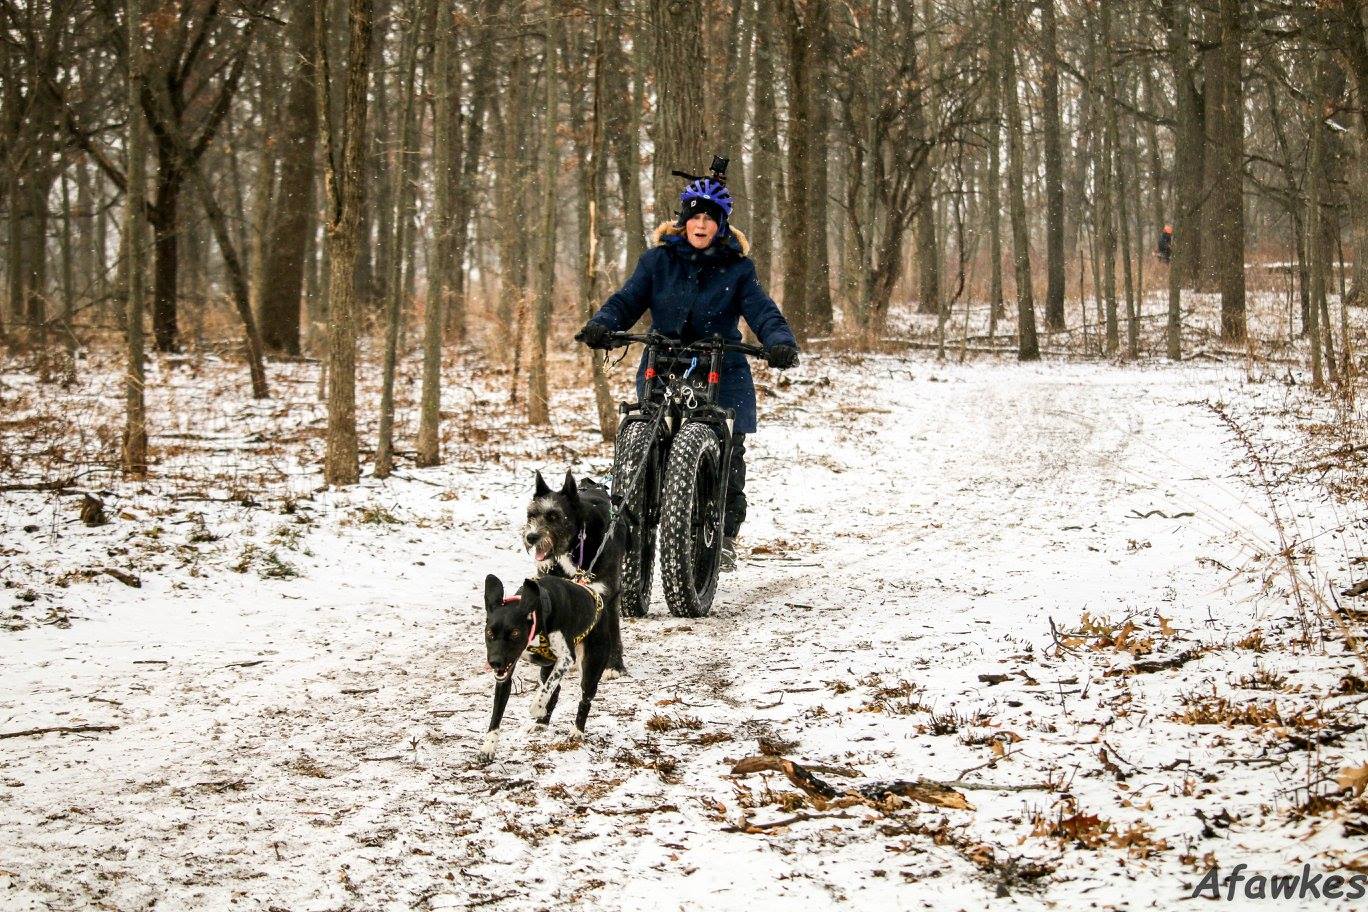 Woman on bike being pulled by two black dogs. 